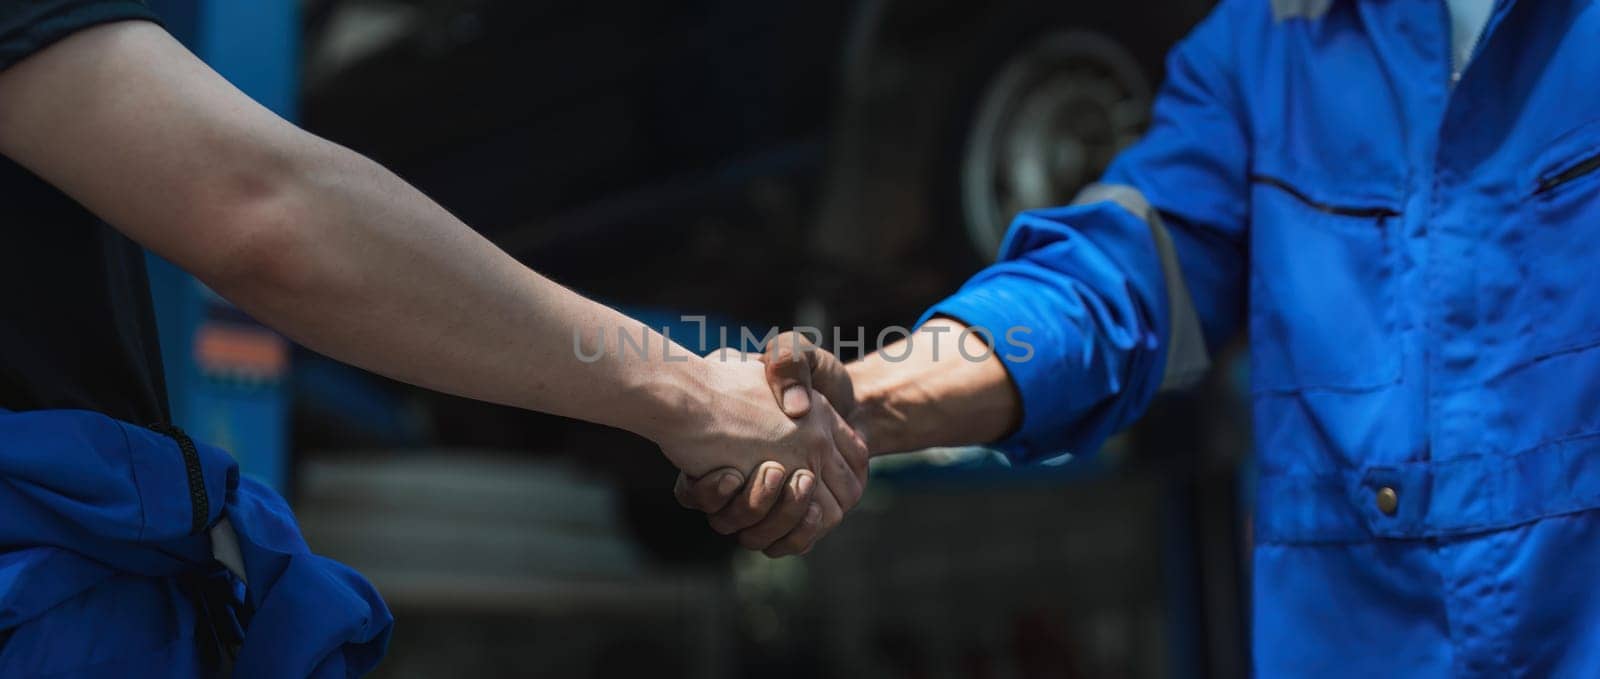 Young man client shaking hands with auto mechanic in red uniform having a deal at the car service by nateemee